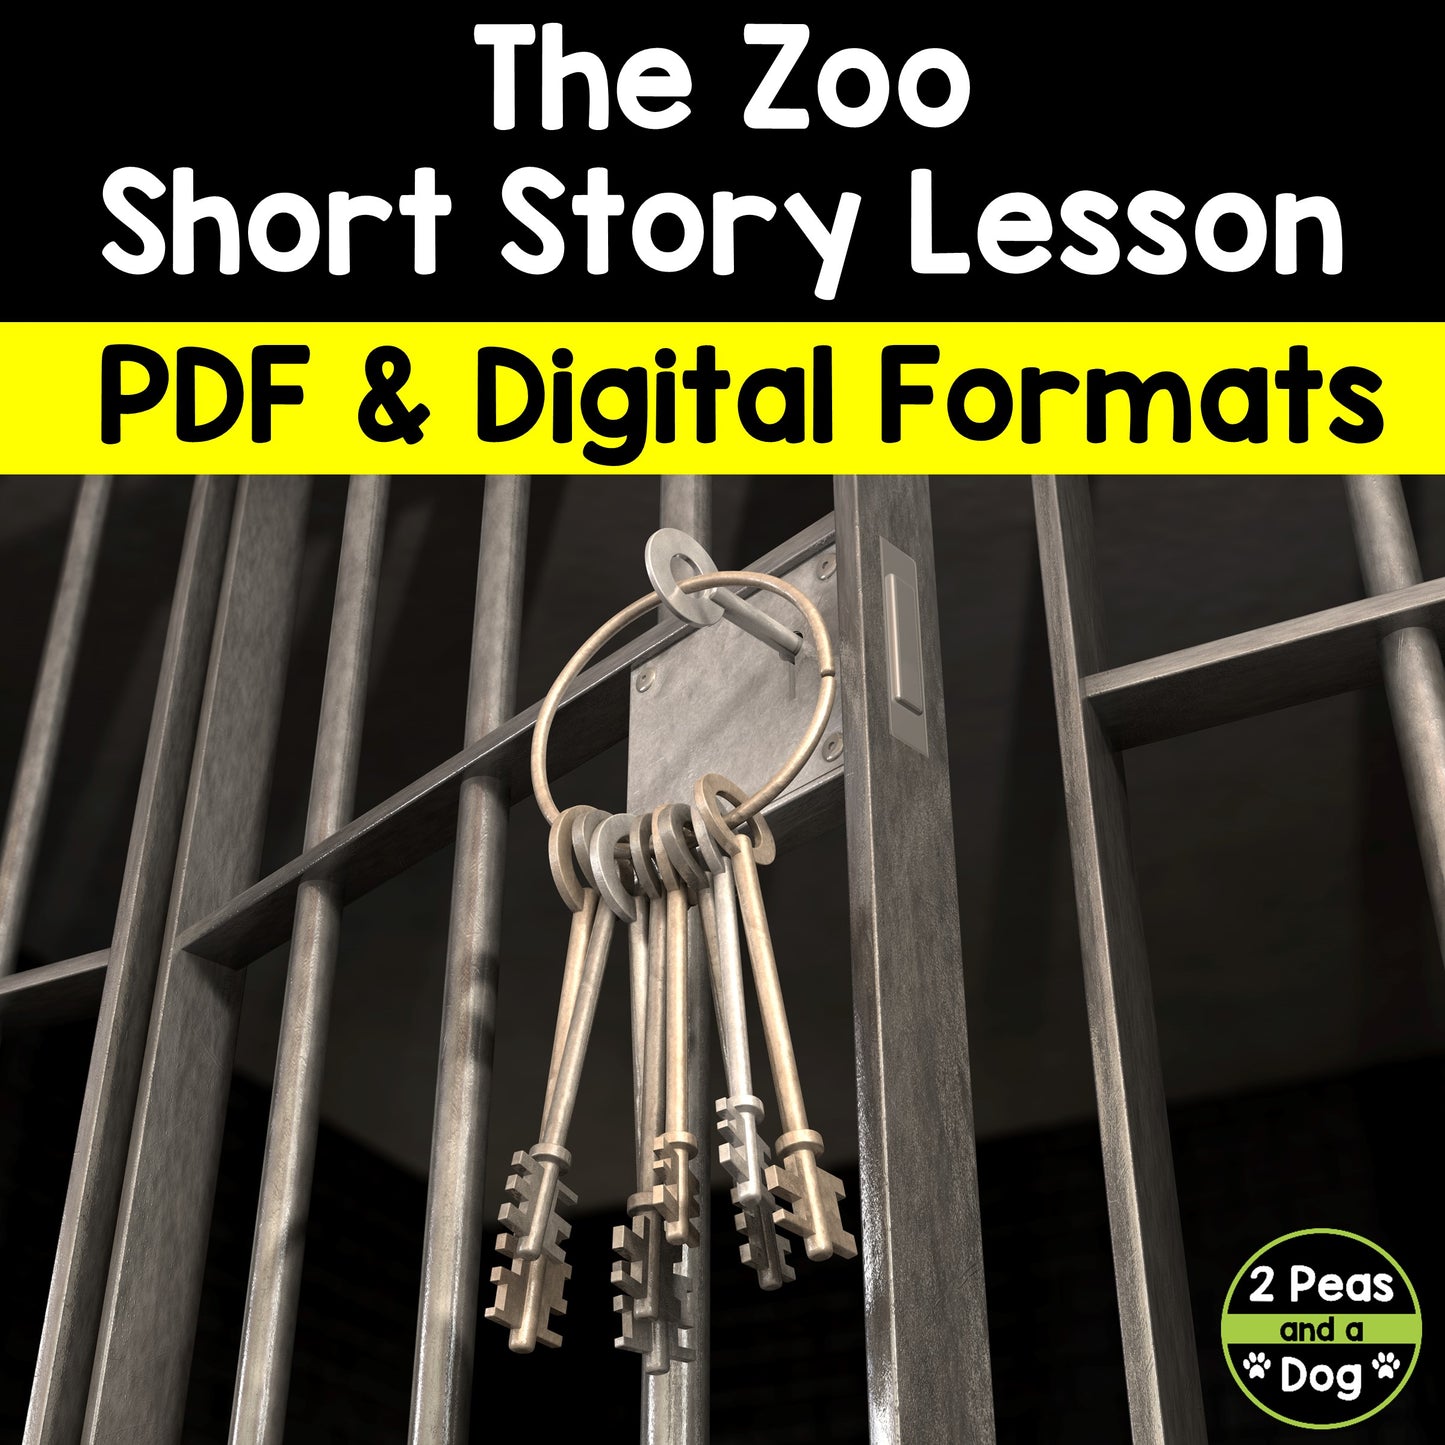 The Zoo Short Story Lesson